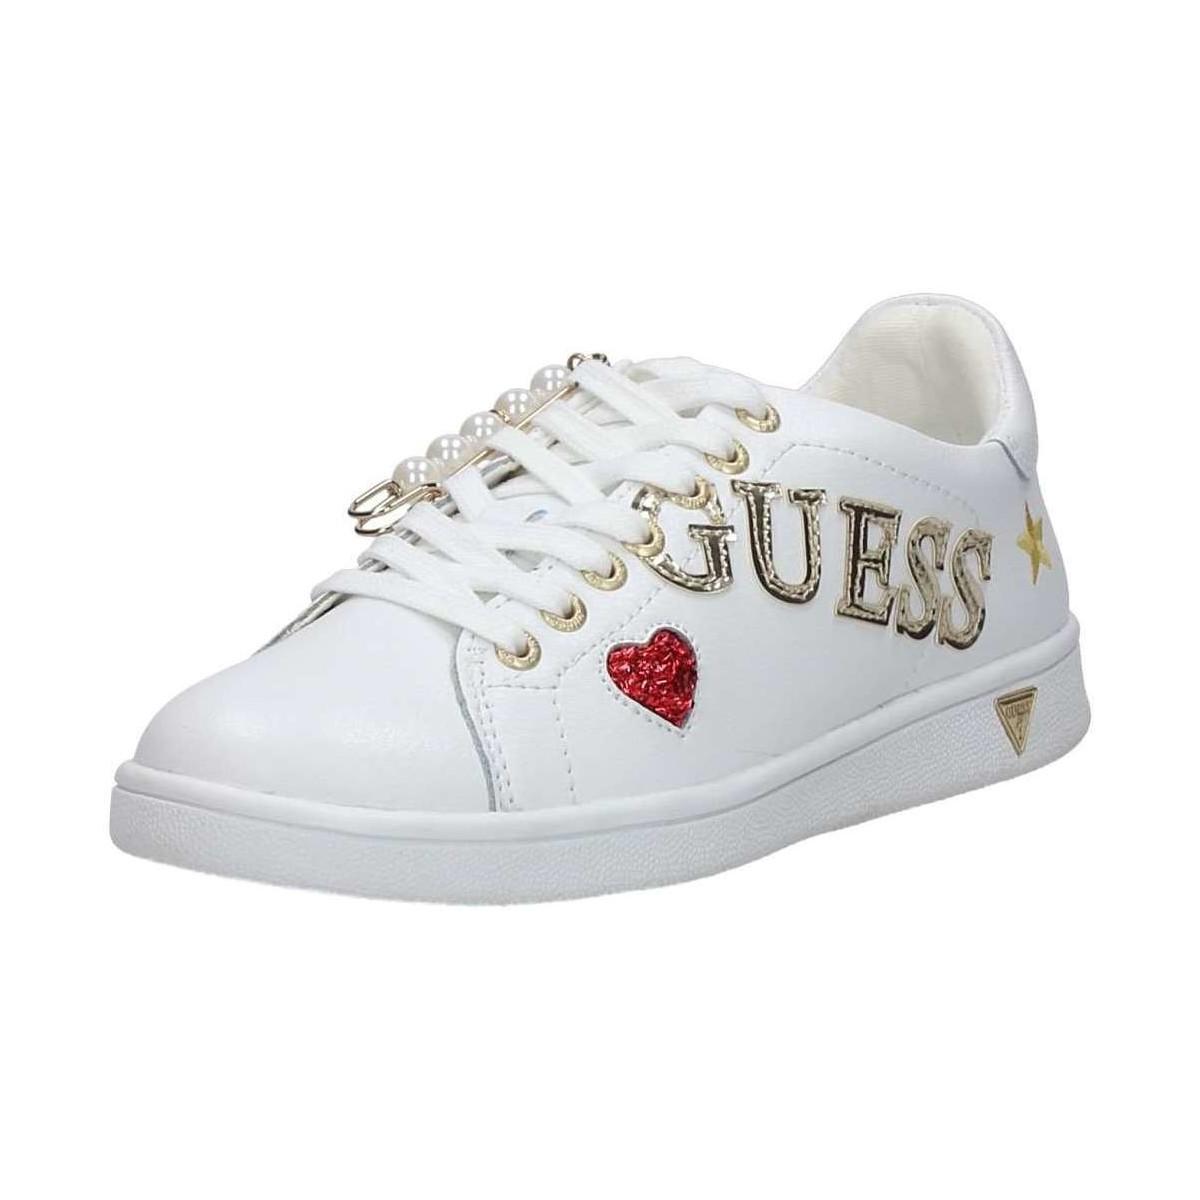 ladies white guess trainers